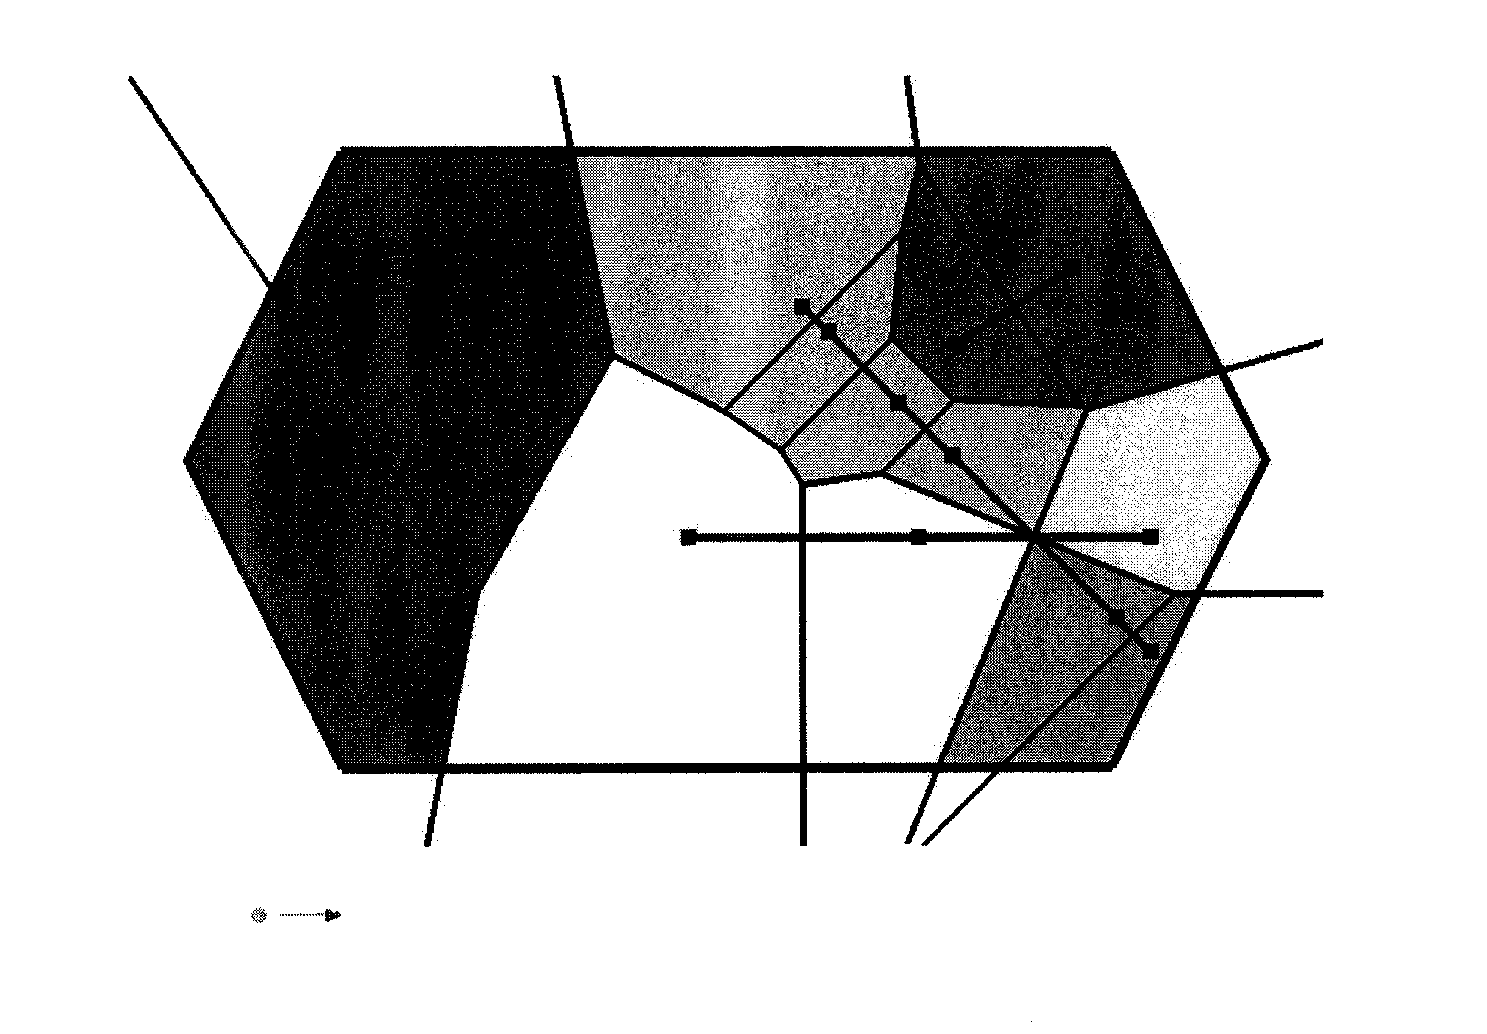 Method for constructing a fracture network grid from a Voronoi diagram